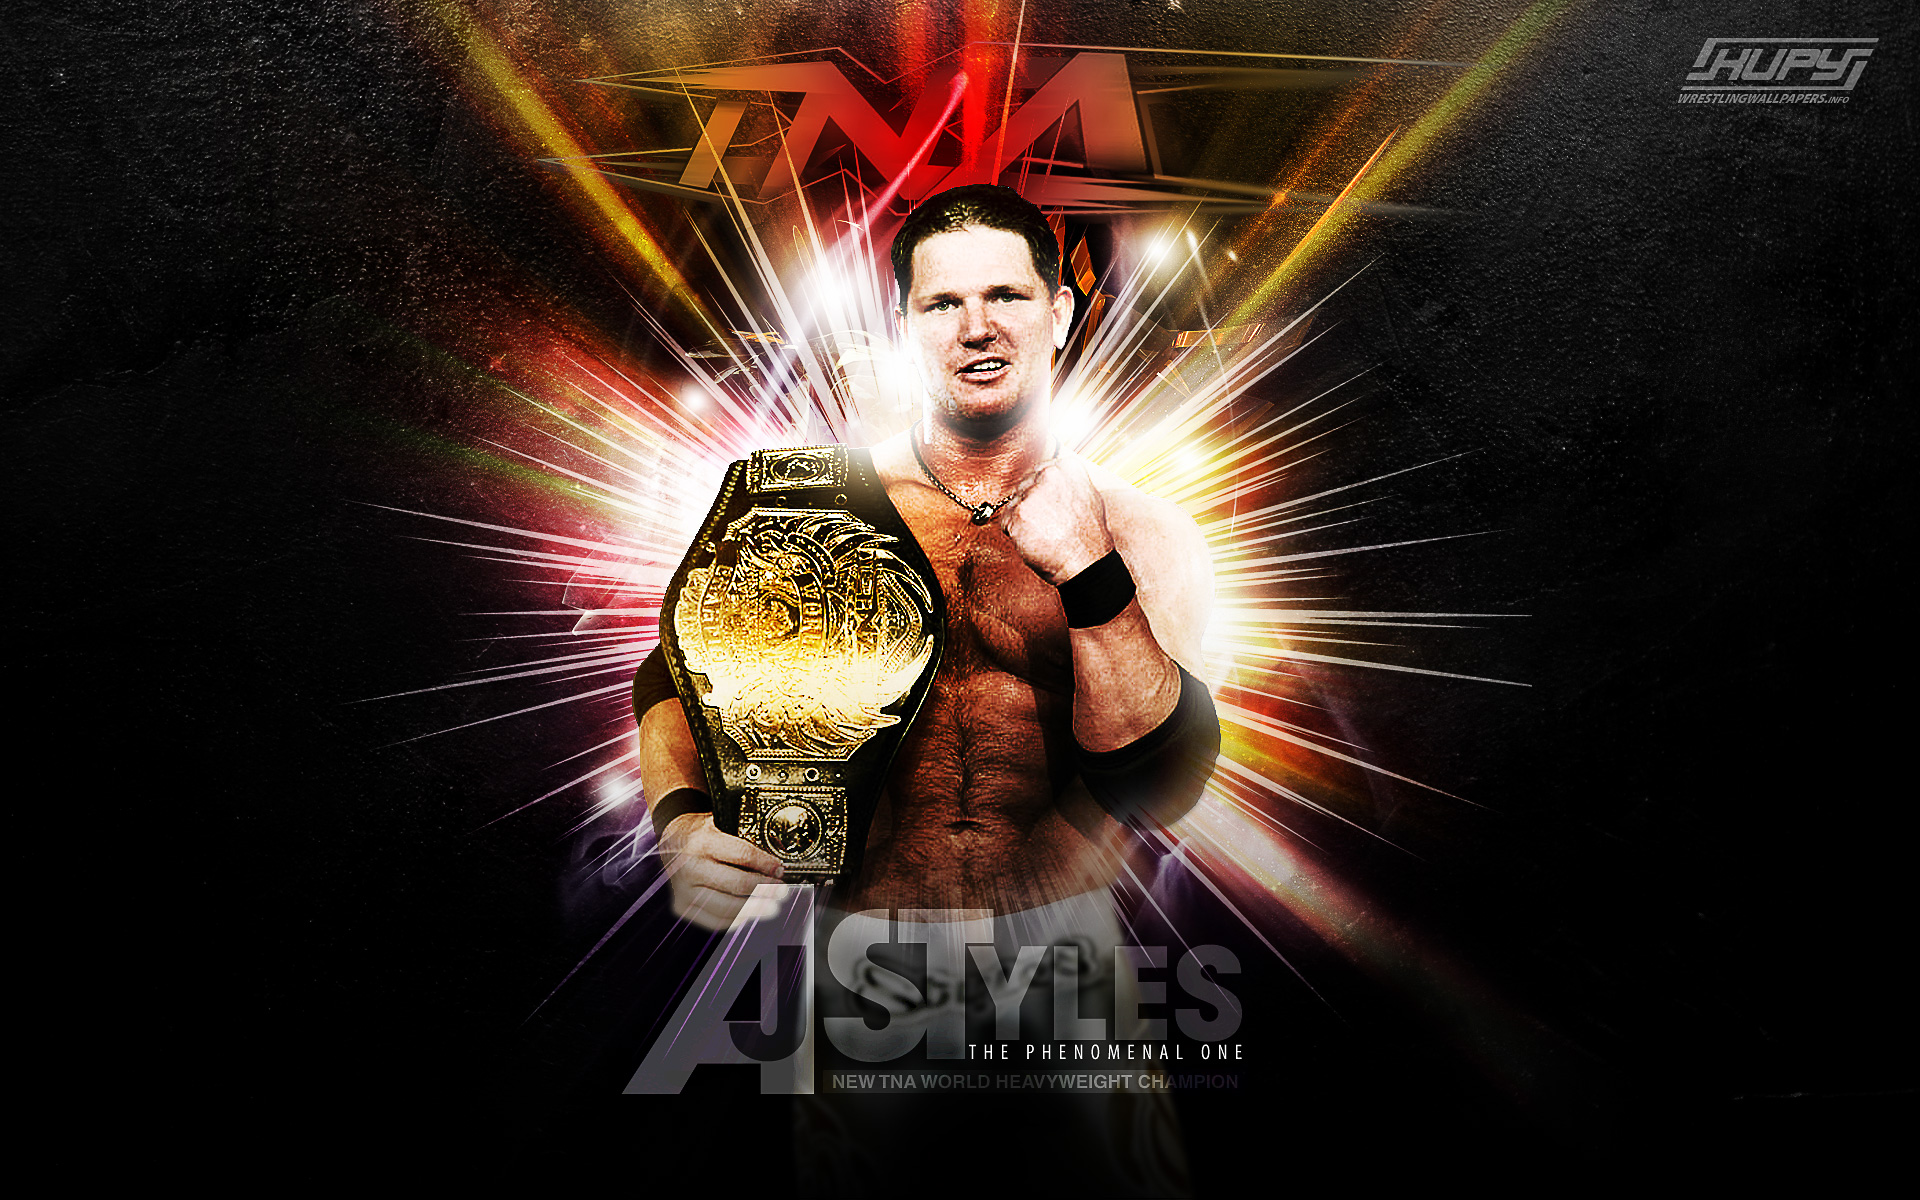 Widescreen iPhone iPad And Psp Resolutions Available Aj Styles